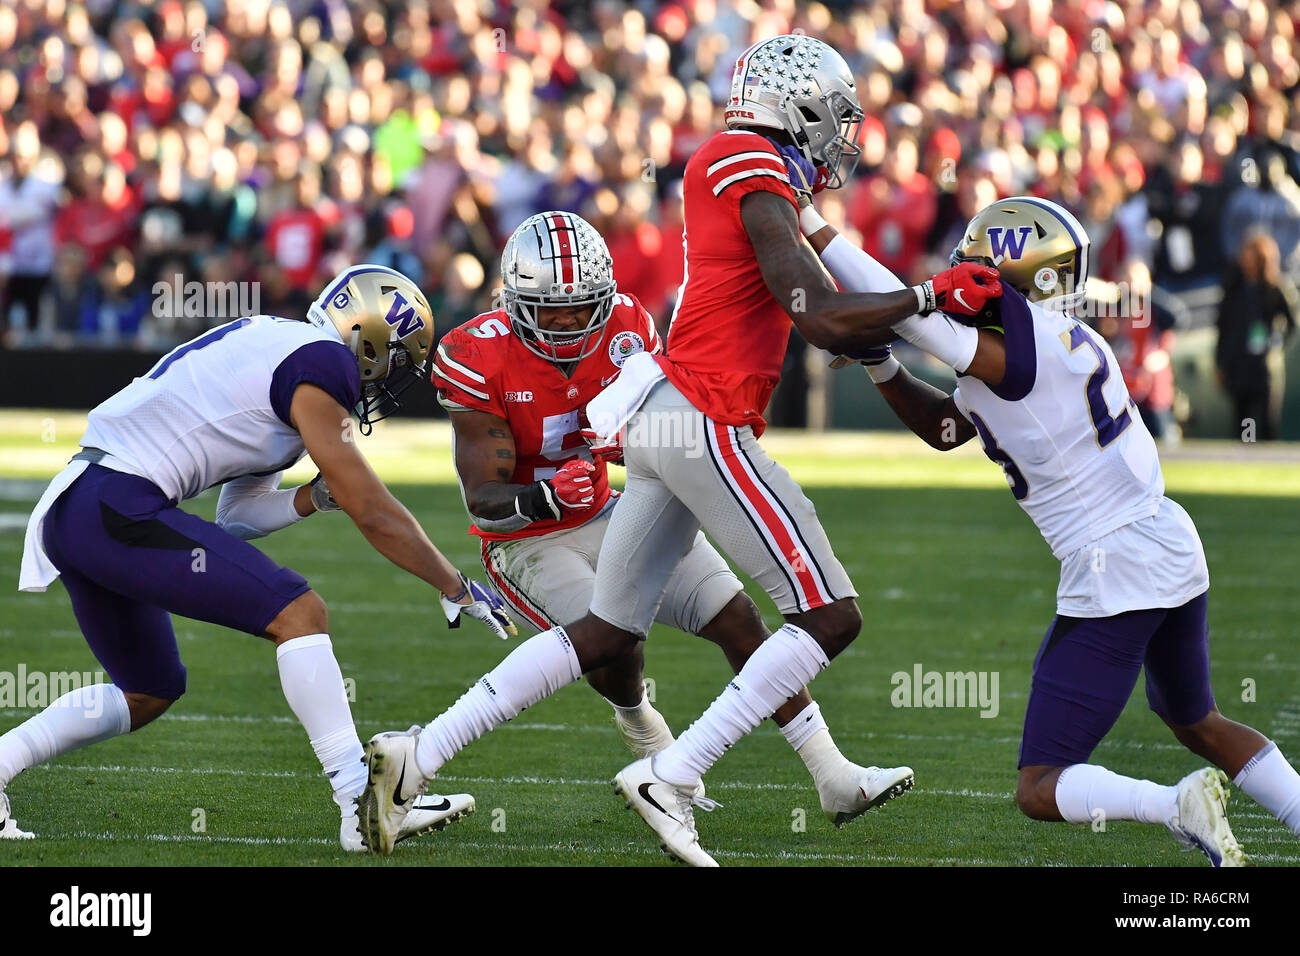 Pasadena, CA. 1st Jan, 2019. Ohio State Buckeyes running back Mike Weber Jr. #5 runs in the first quarter during the 105th Rose Bowl College football game between the Ohio State Buckeyes and the Washington Huskies at the Rose Bowl on January 01, 2019 in Pasadena, California.Louis Lopez/CSM/Alamy Live News Credit: Cal Sport Media/Alamy Live News Stock Photo